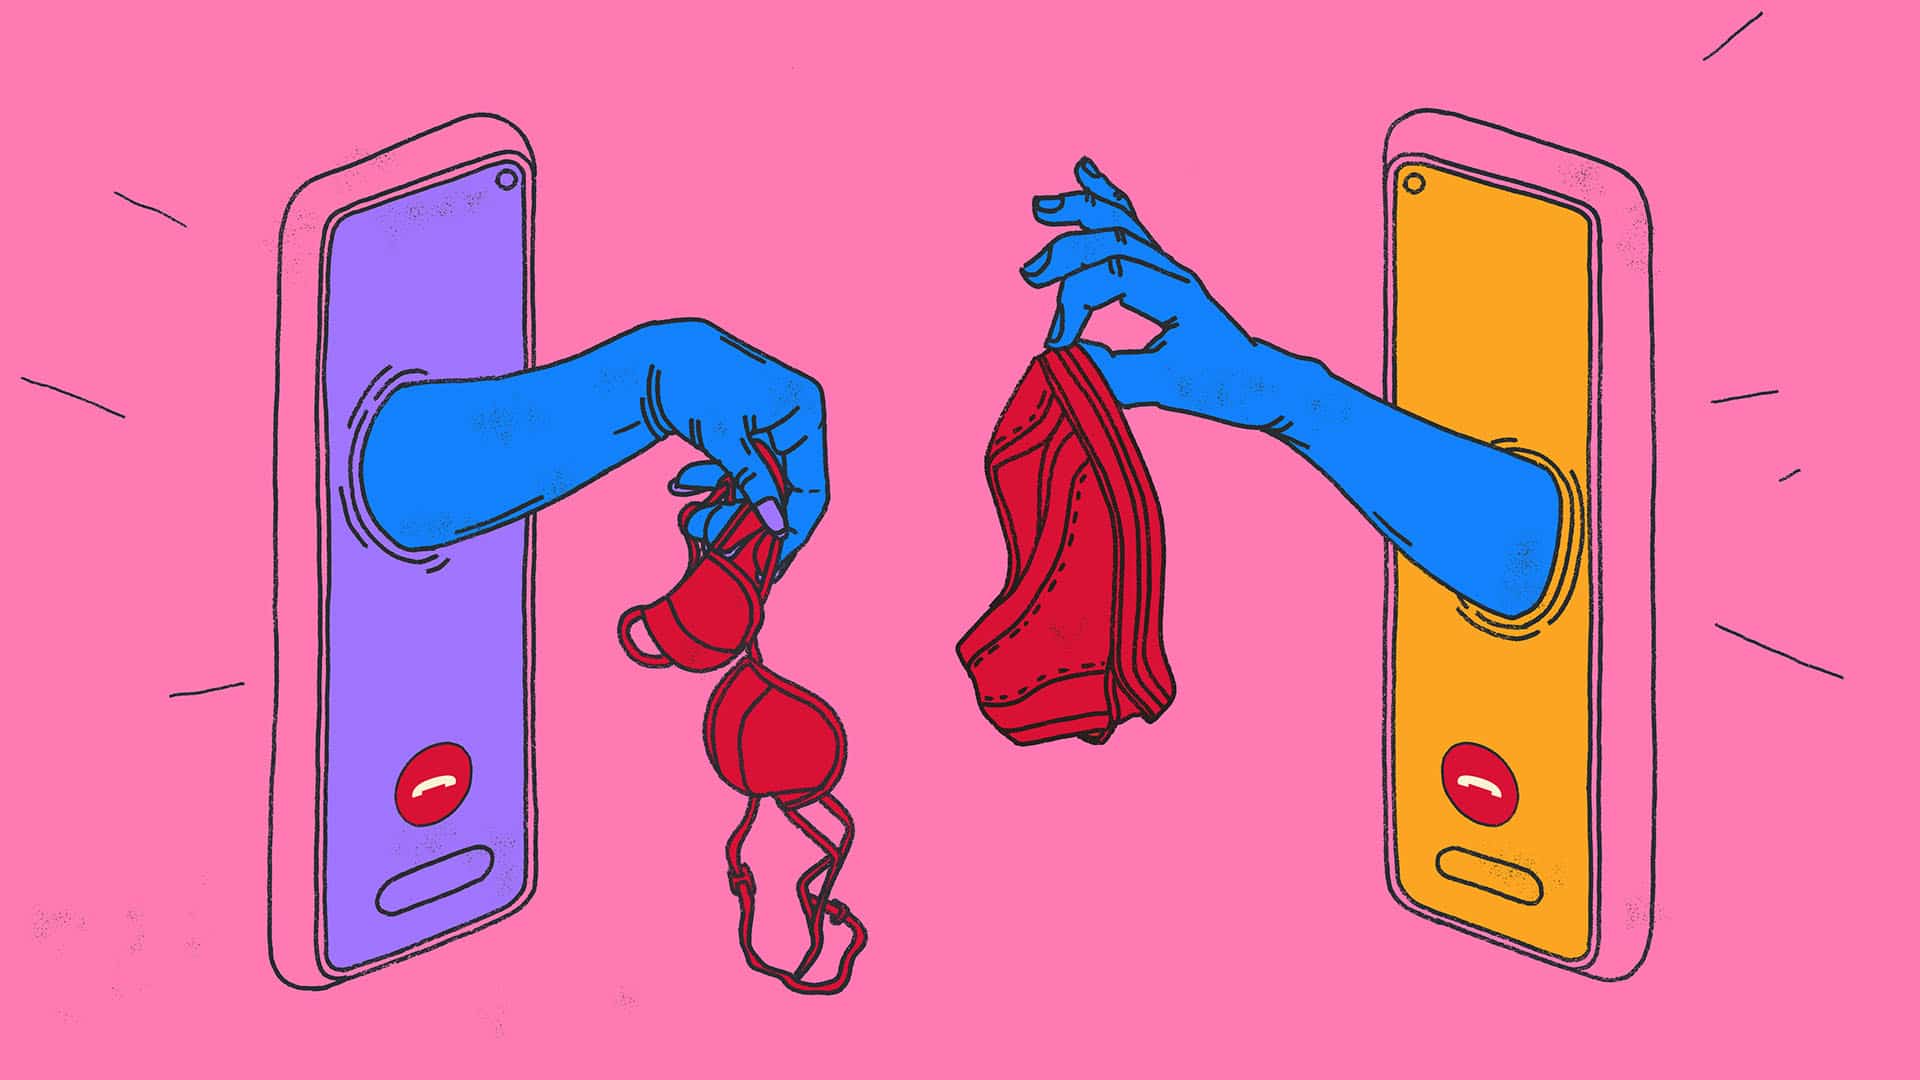 Naked Sexting Conversations - What should I do if I receive unwanted sexts? - spunout